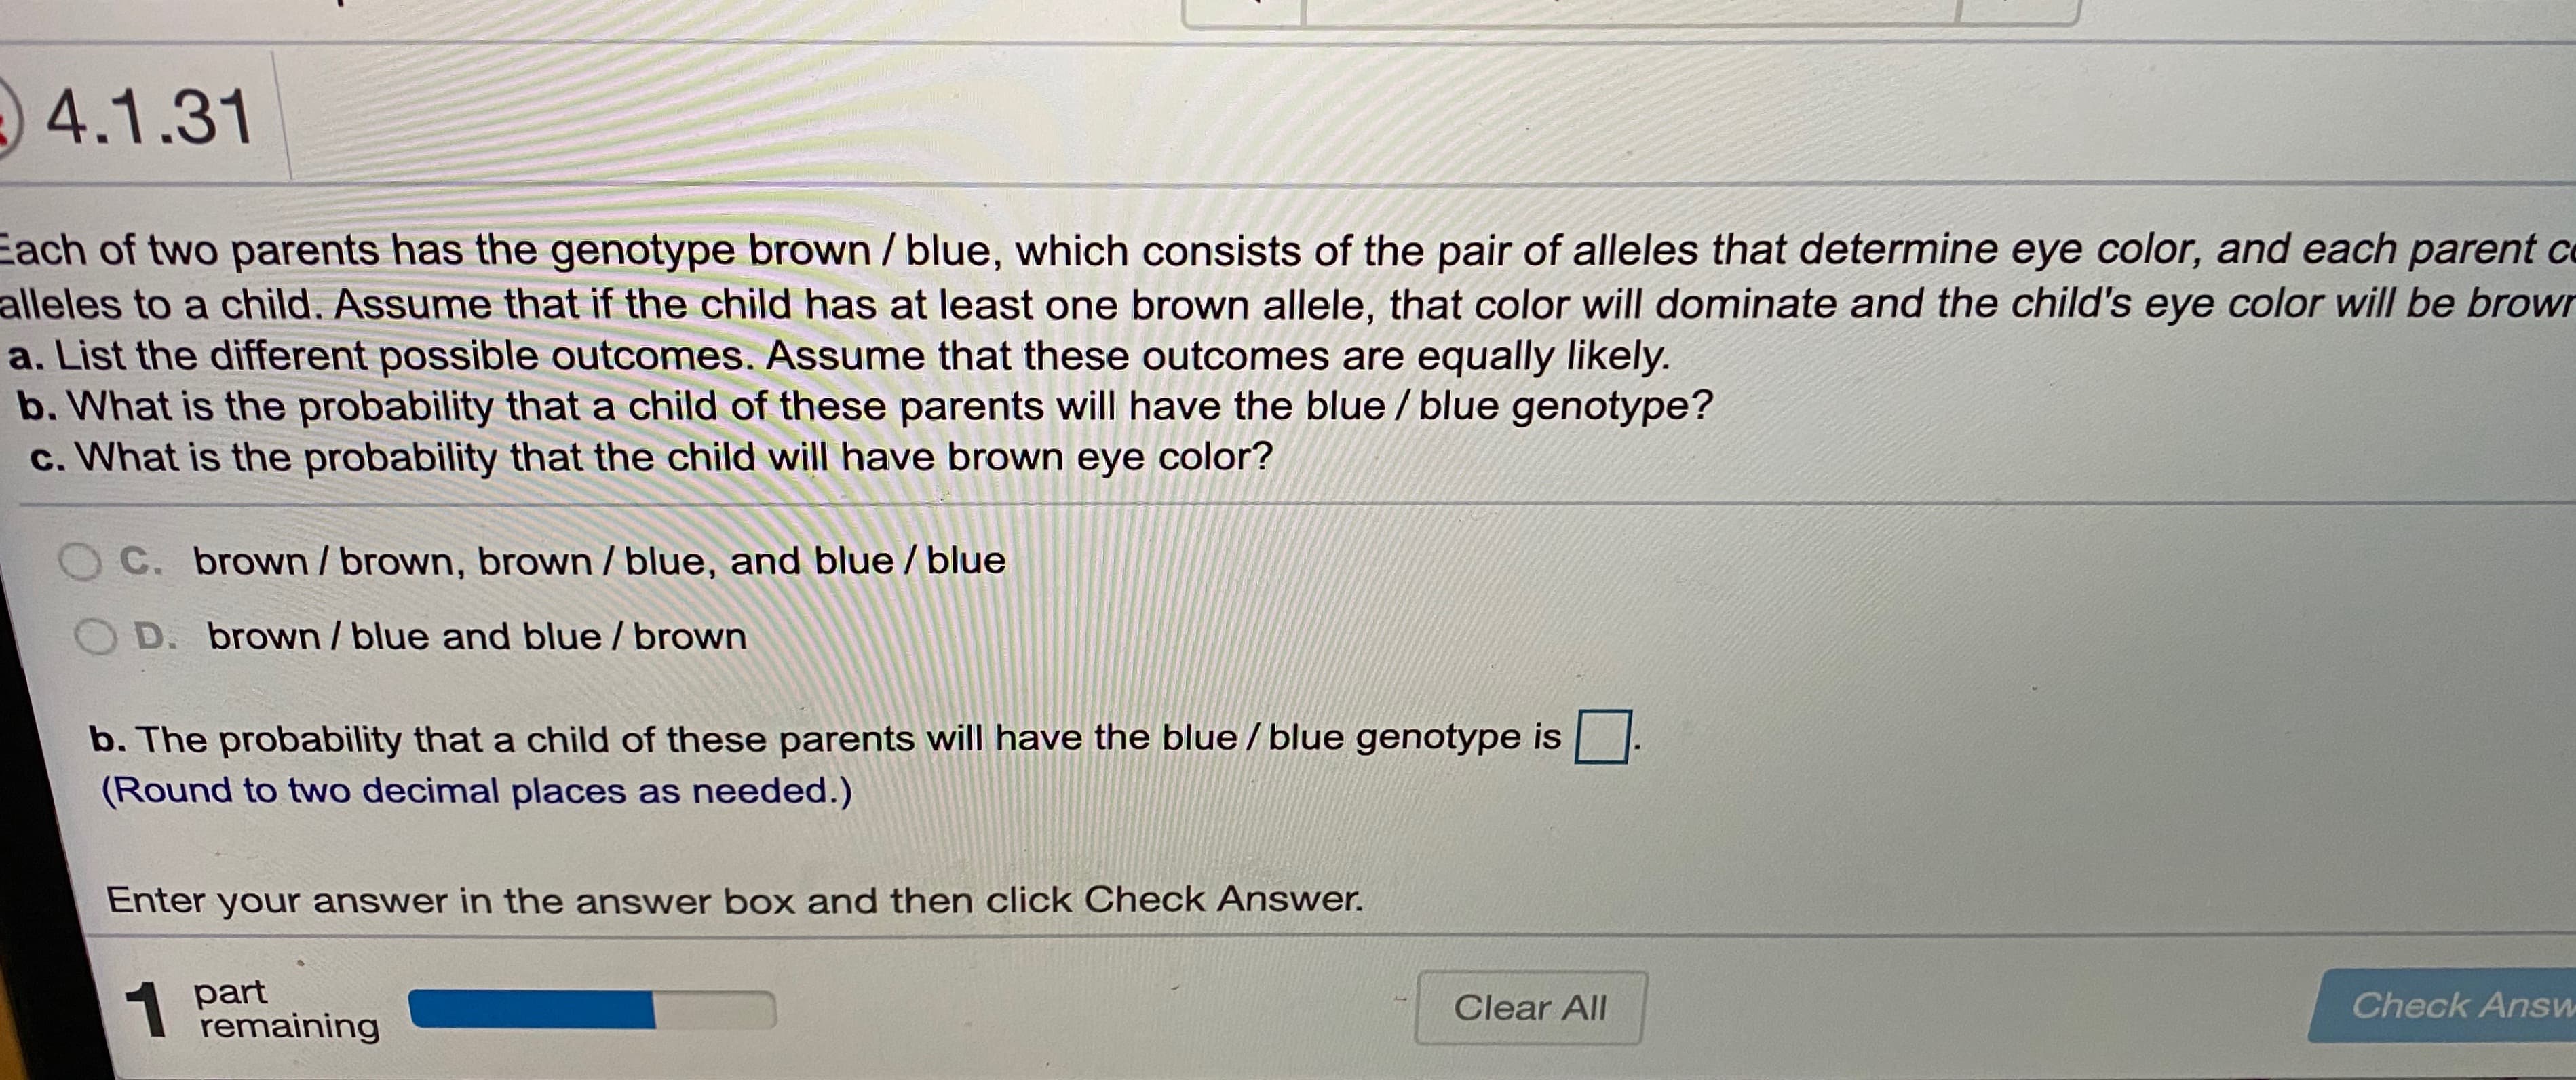 4.1.31
Each of two parents has the genotype brown / blue, which consists of the pair of alleles that determine eye color, and each parent c
alleles to a child. Assume that if the child has at least one brown allele, that color will dominate and the child's eye color will be browr
a. List the different possible outcomes. Assume that these outcomes are equally likely.
b. What is the probability that a child of these parents will have the blue / blue genotype?
c. What is the probability that the child will have brown eye color?
OC. brown / brown, brown / blue, and blue / blue
O D. brown / blue and blue / brown
b. The probability that a child of these parents will have the blue / blue genotype is
(Round to two decimal places as needed.)
Enter your answer in the answer box and then click Check Answer.
1 part
remaining
Clear All
Check Answ
